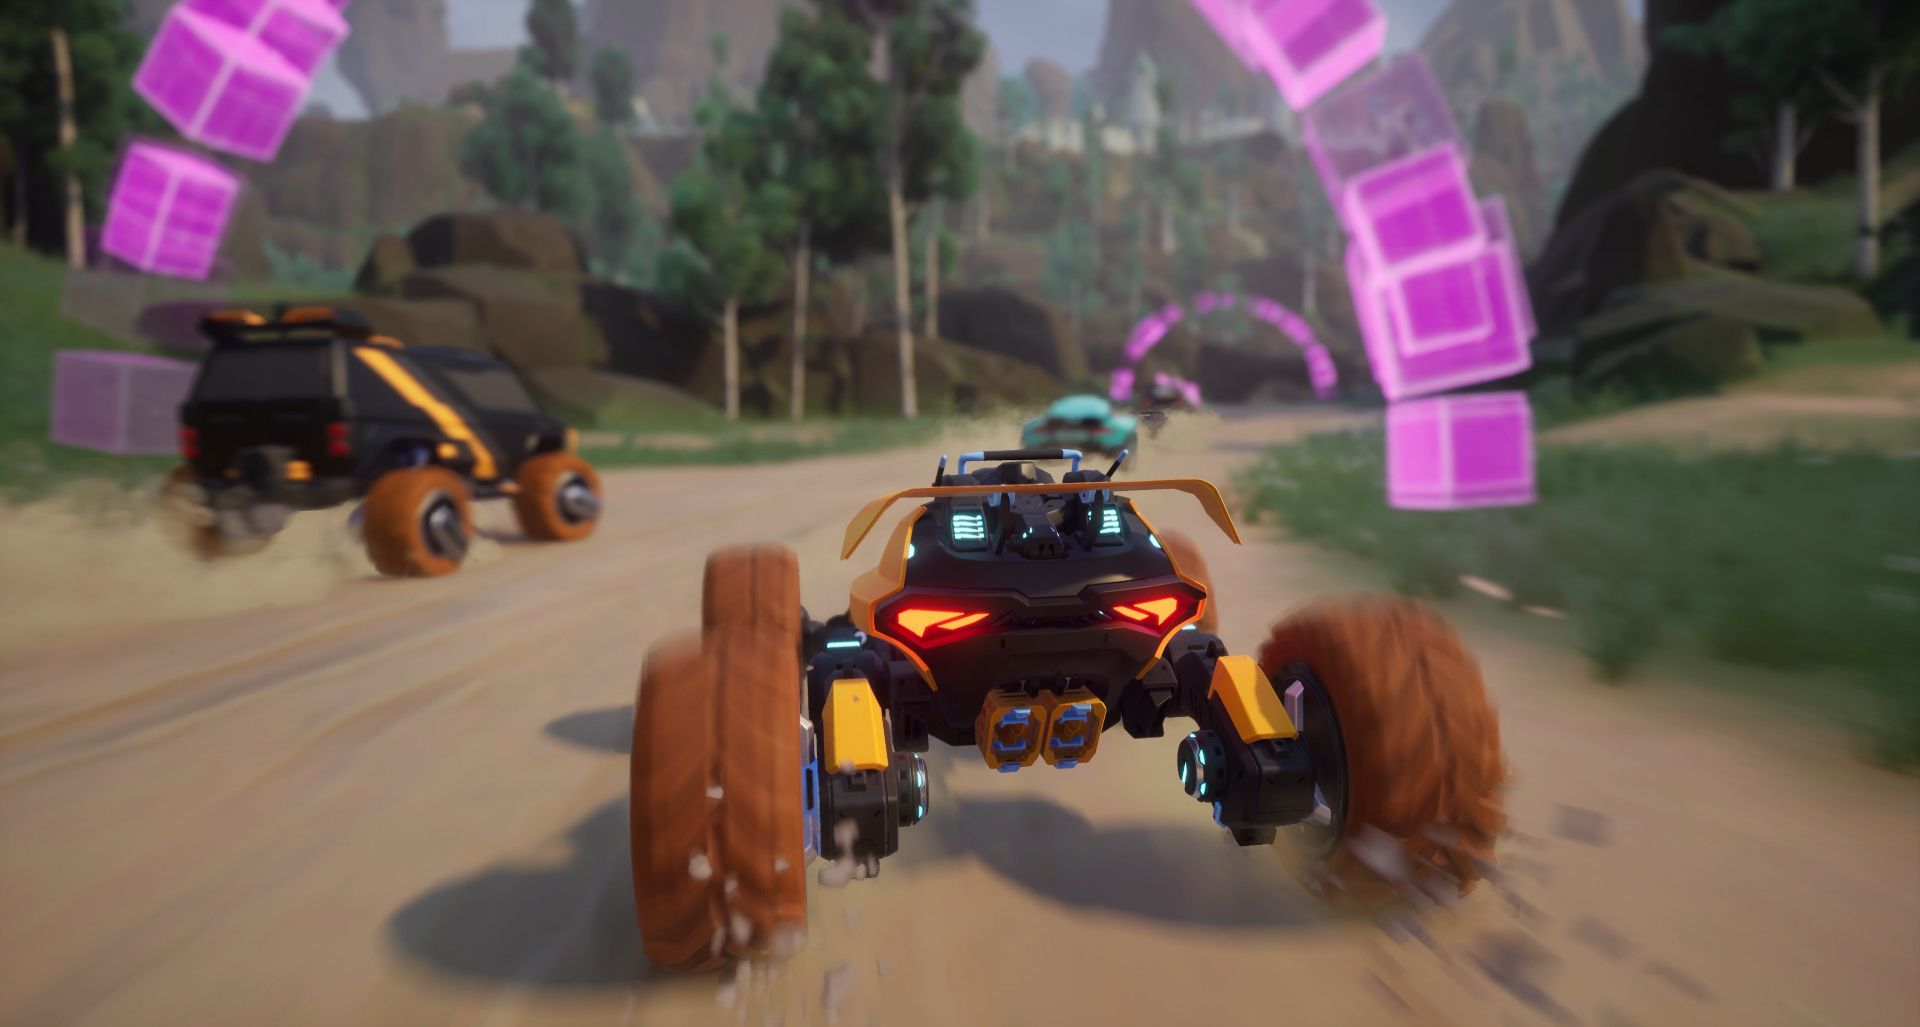 Vehicles with large brown wheels are racing on an offroad course with large purple wavepoints suspended above the track to race through.